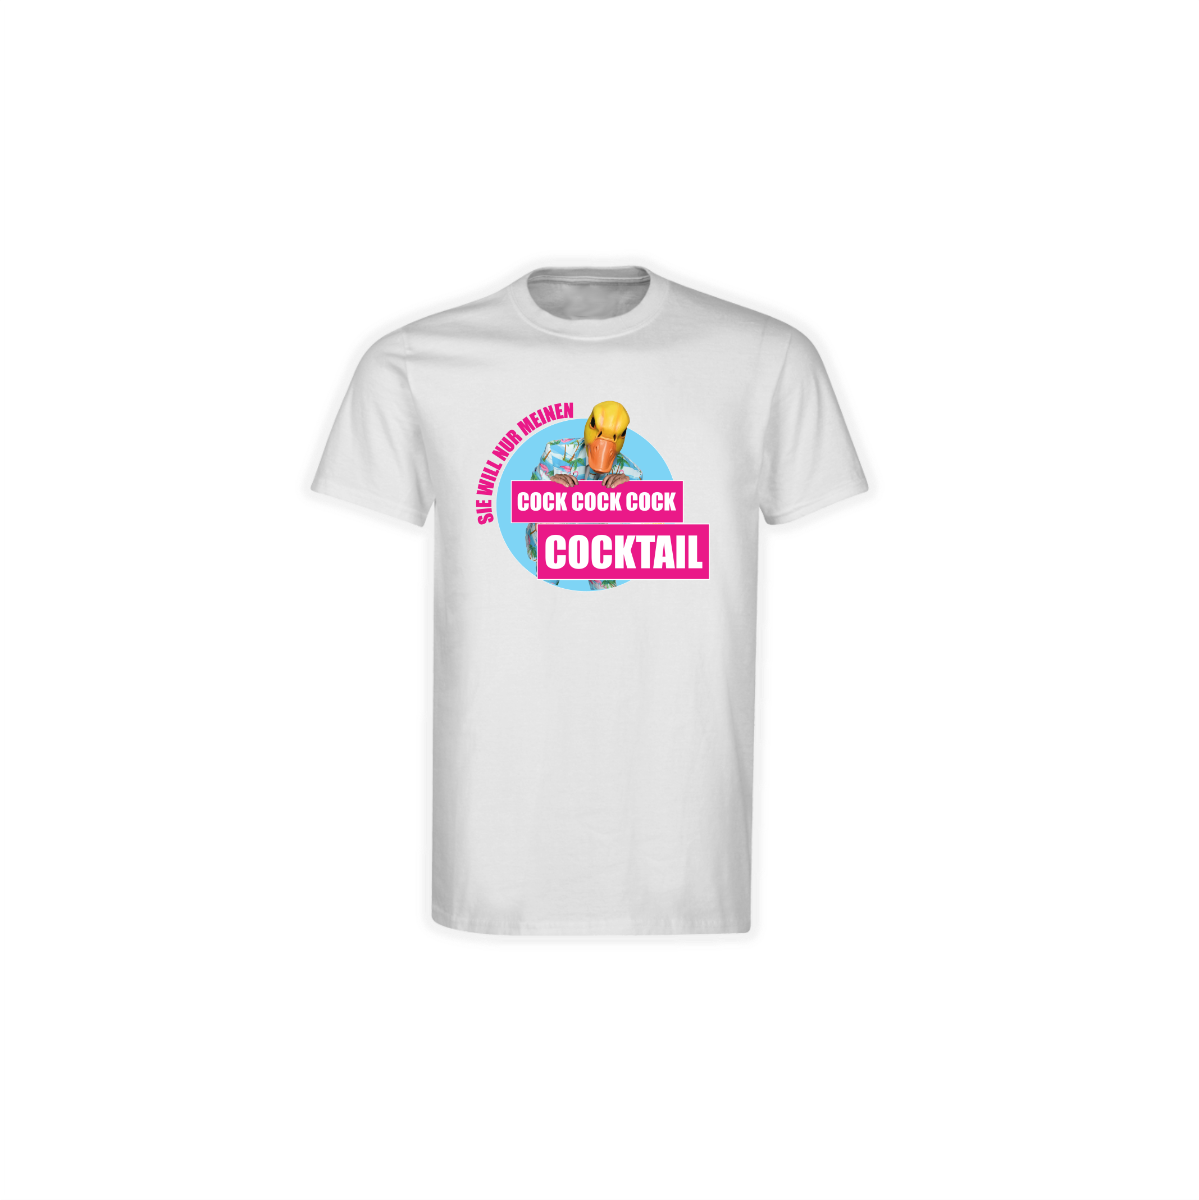 T-Shirt "COCK COCK COCKTAIL" weiß